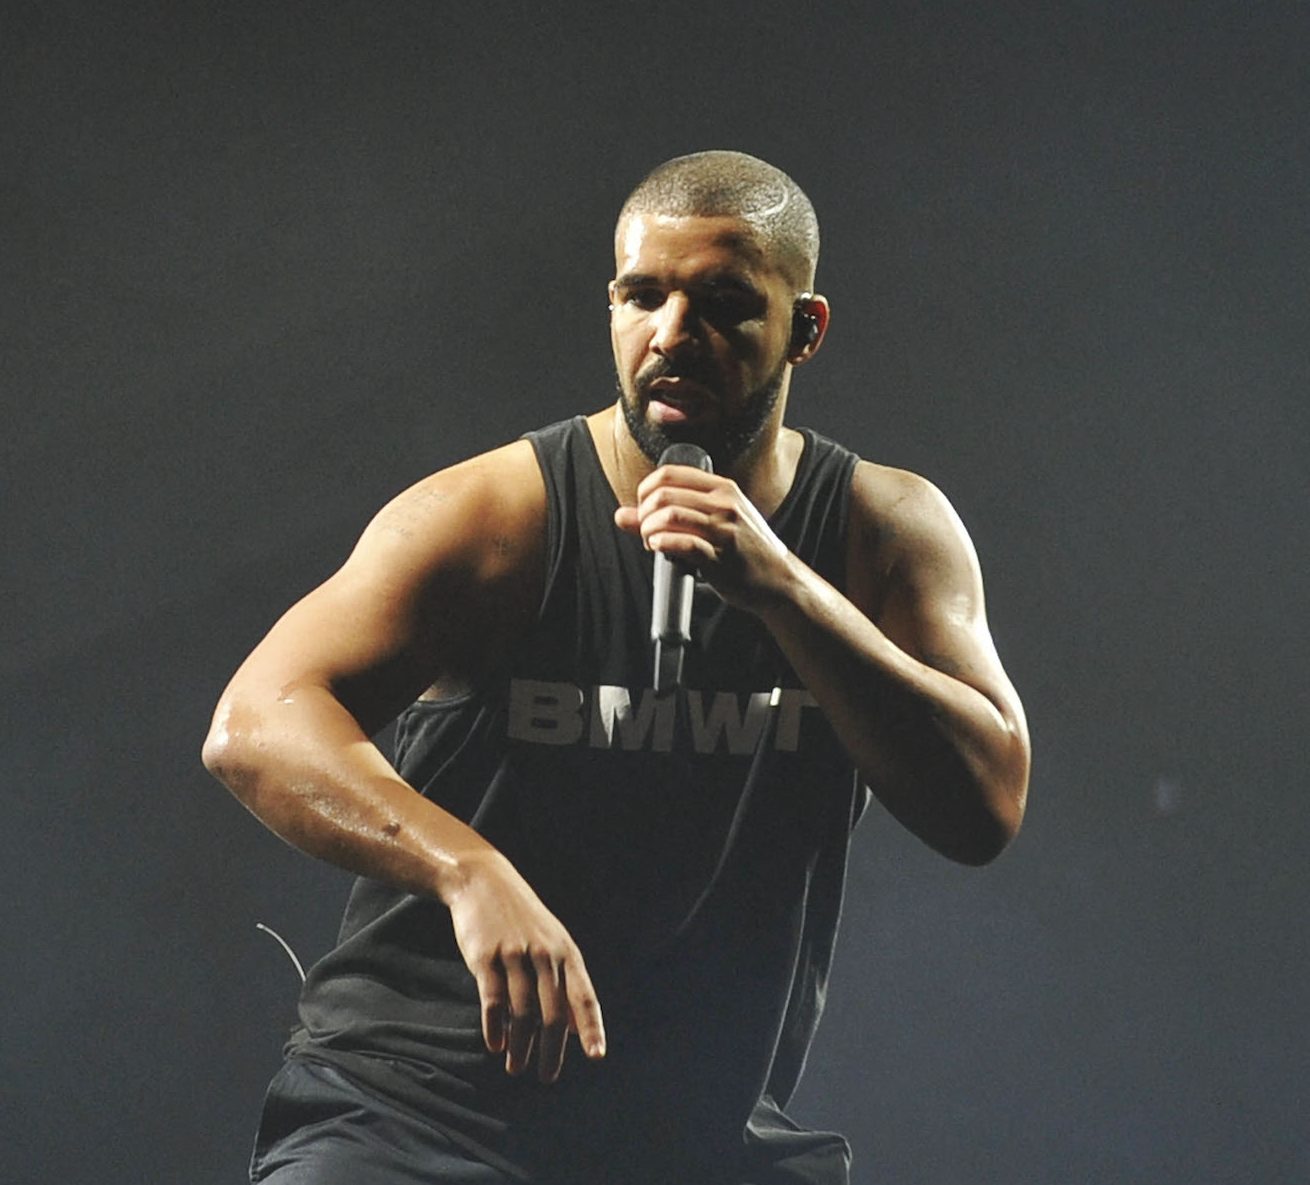 Drake Fan Who Threw 36G Bra on Stage Gets Offer From Playboy